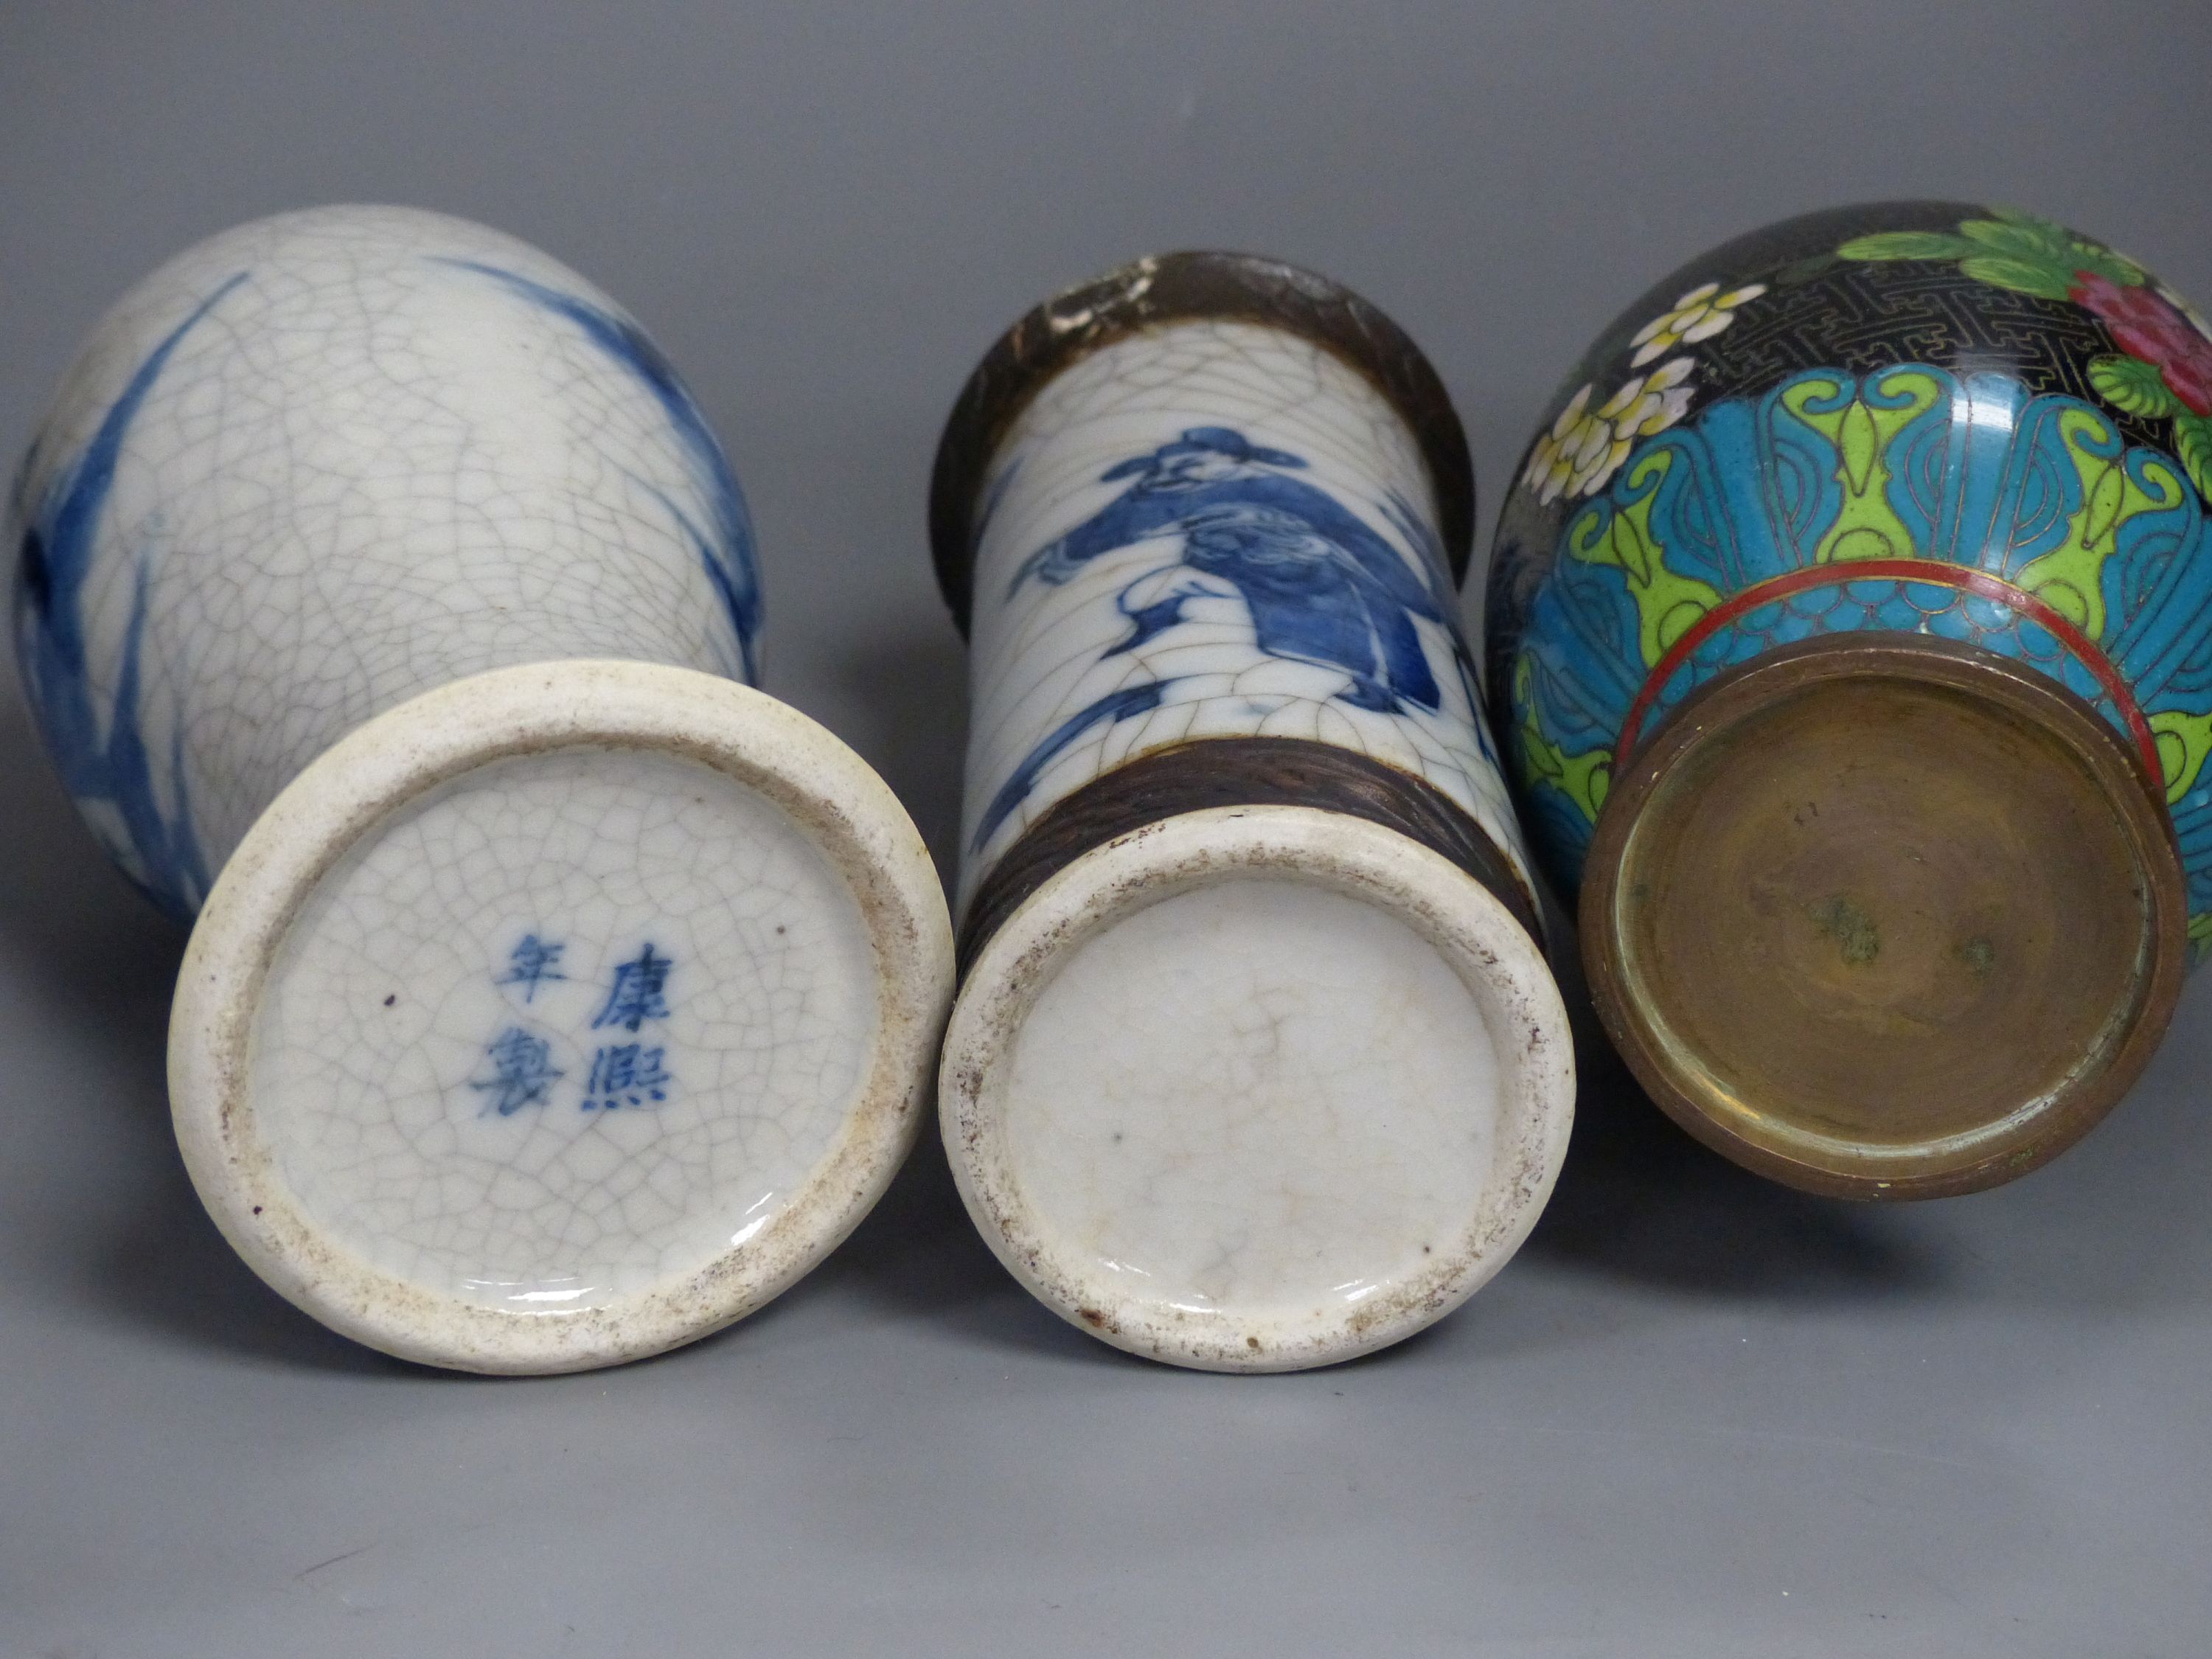 Three Chinese blue and white vases, a cloisonne enamel vase, another vase and a soapstone figure - Image 6 of 6